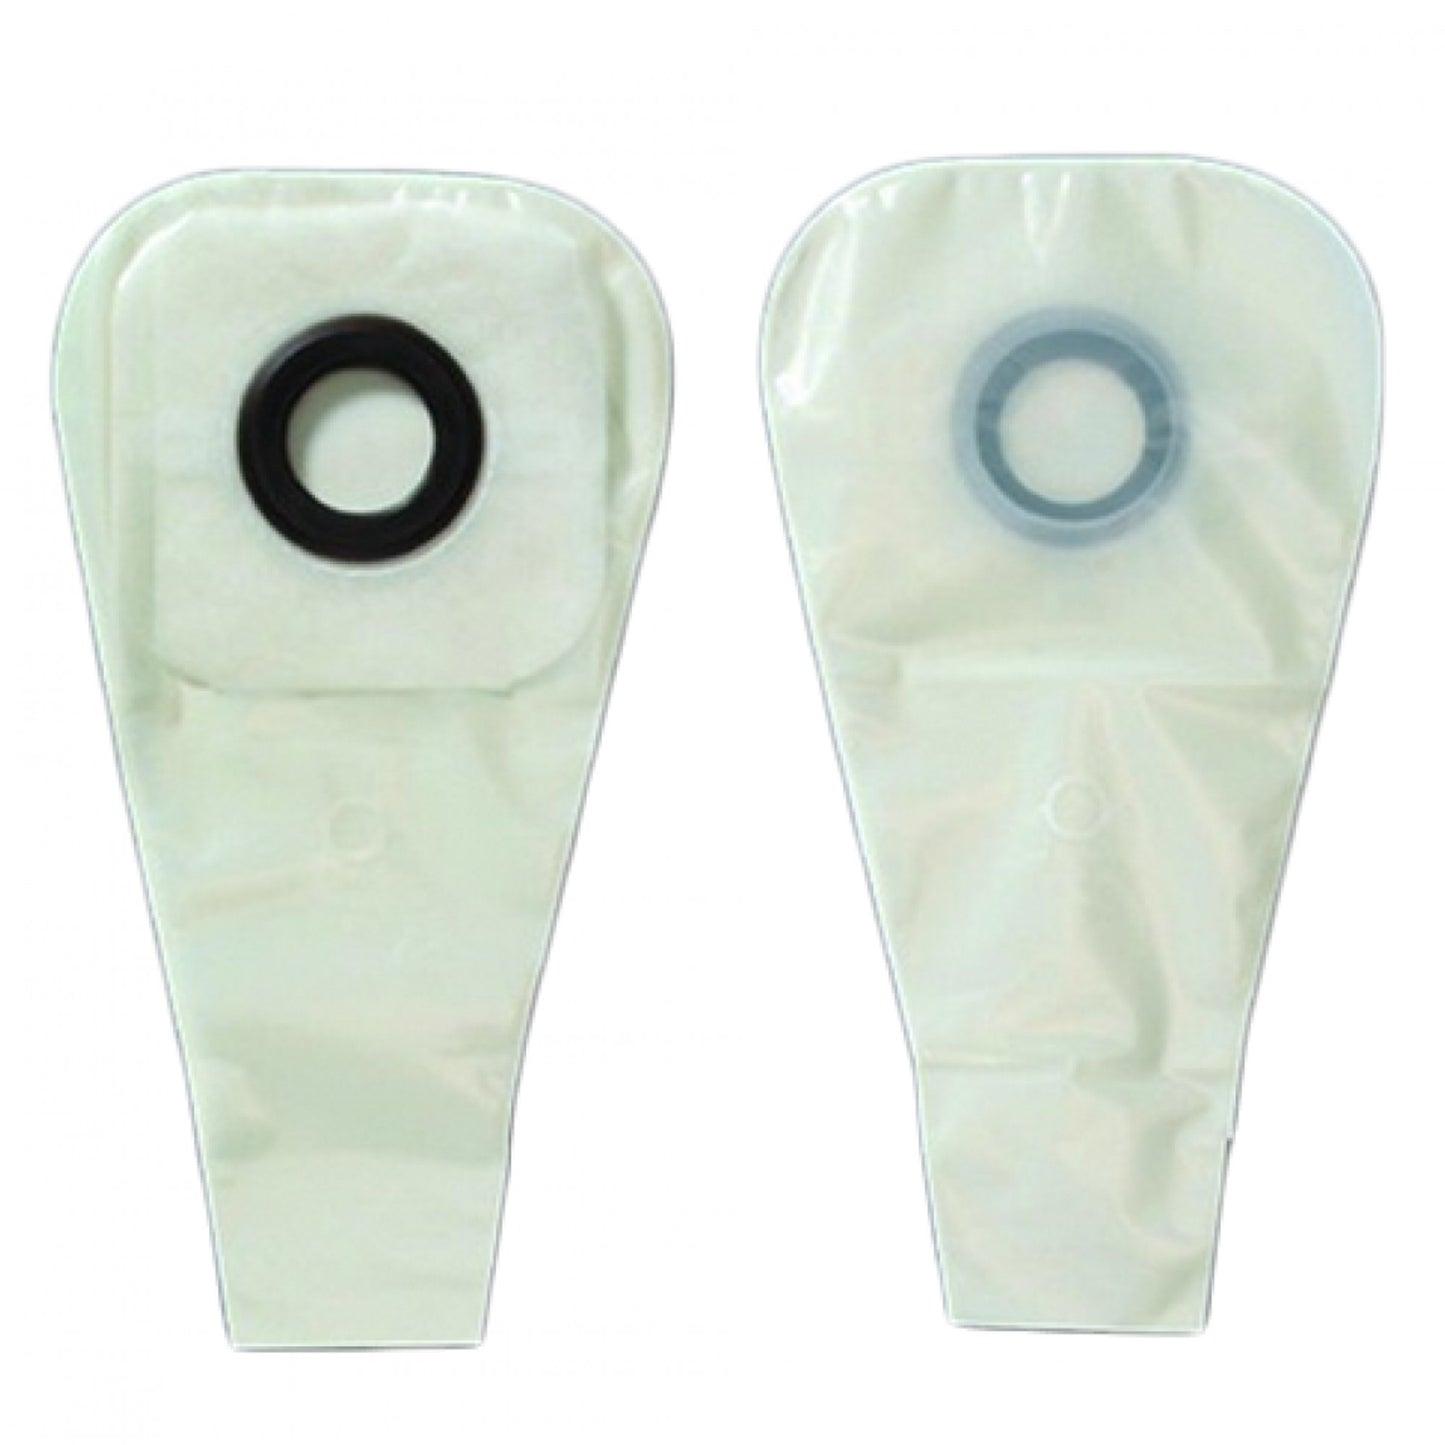 Karaya 5 One-Piece Drainable Transparent Colostomy Pouch, 16 Inch Length, 1-3/8 Inch Stoma, 30 ct